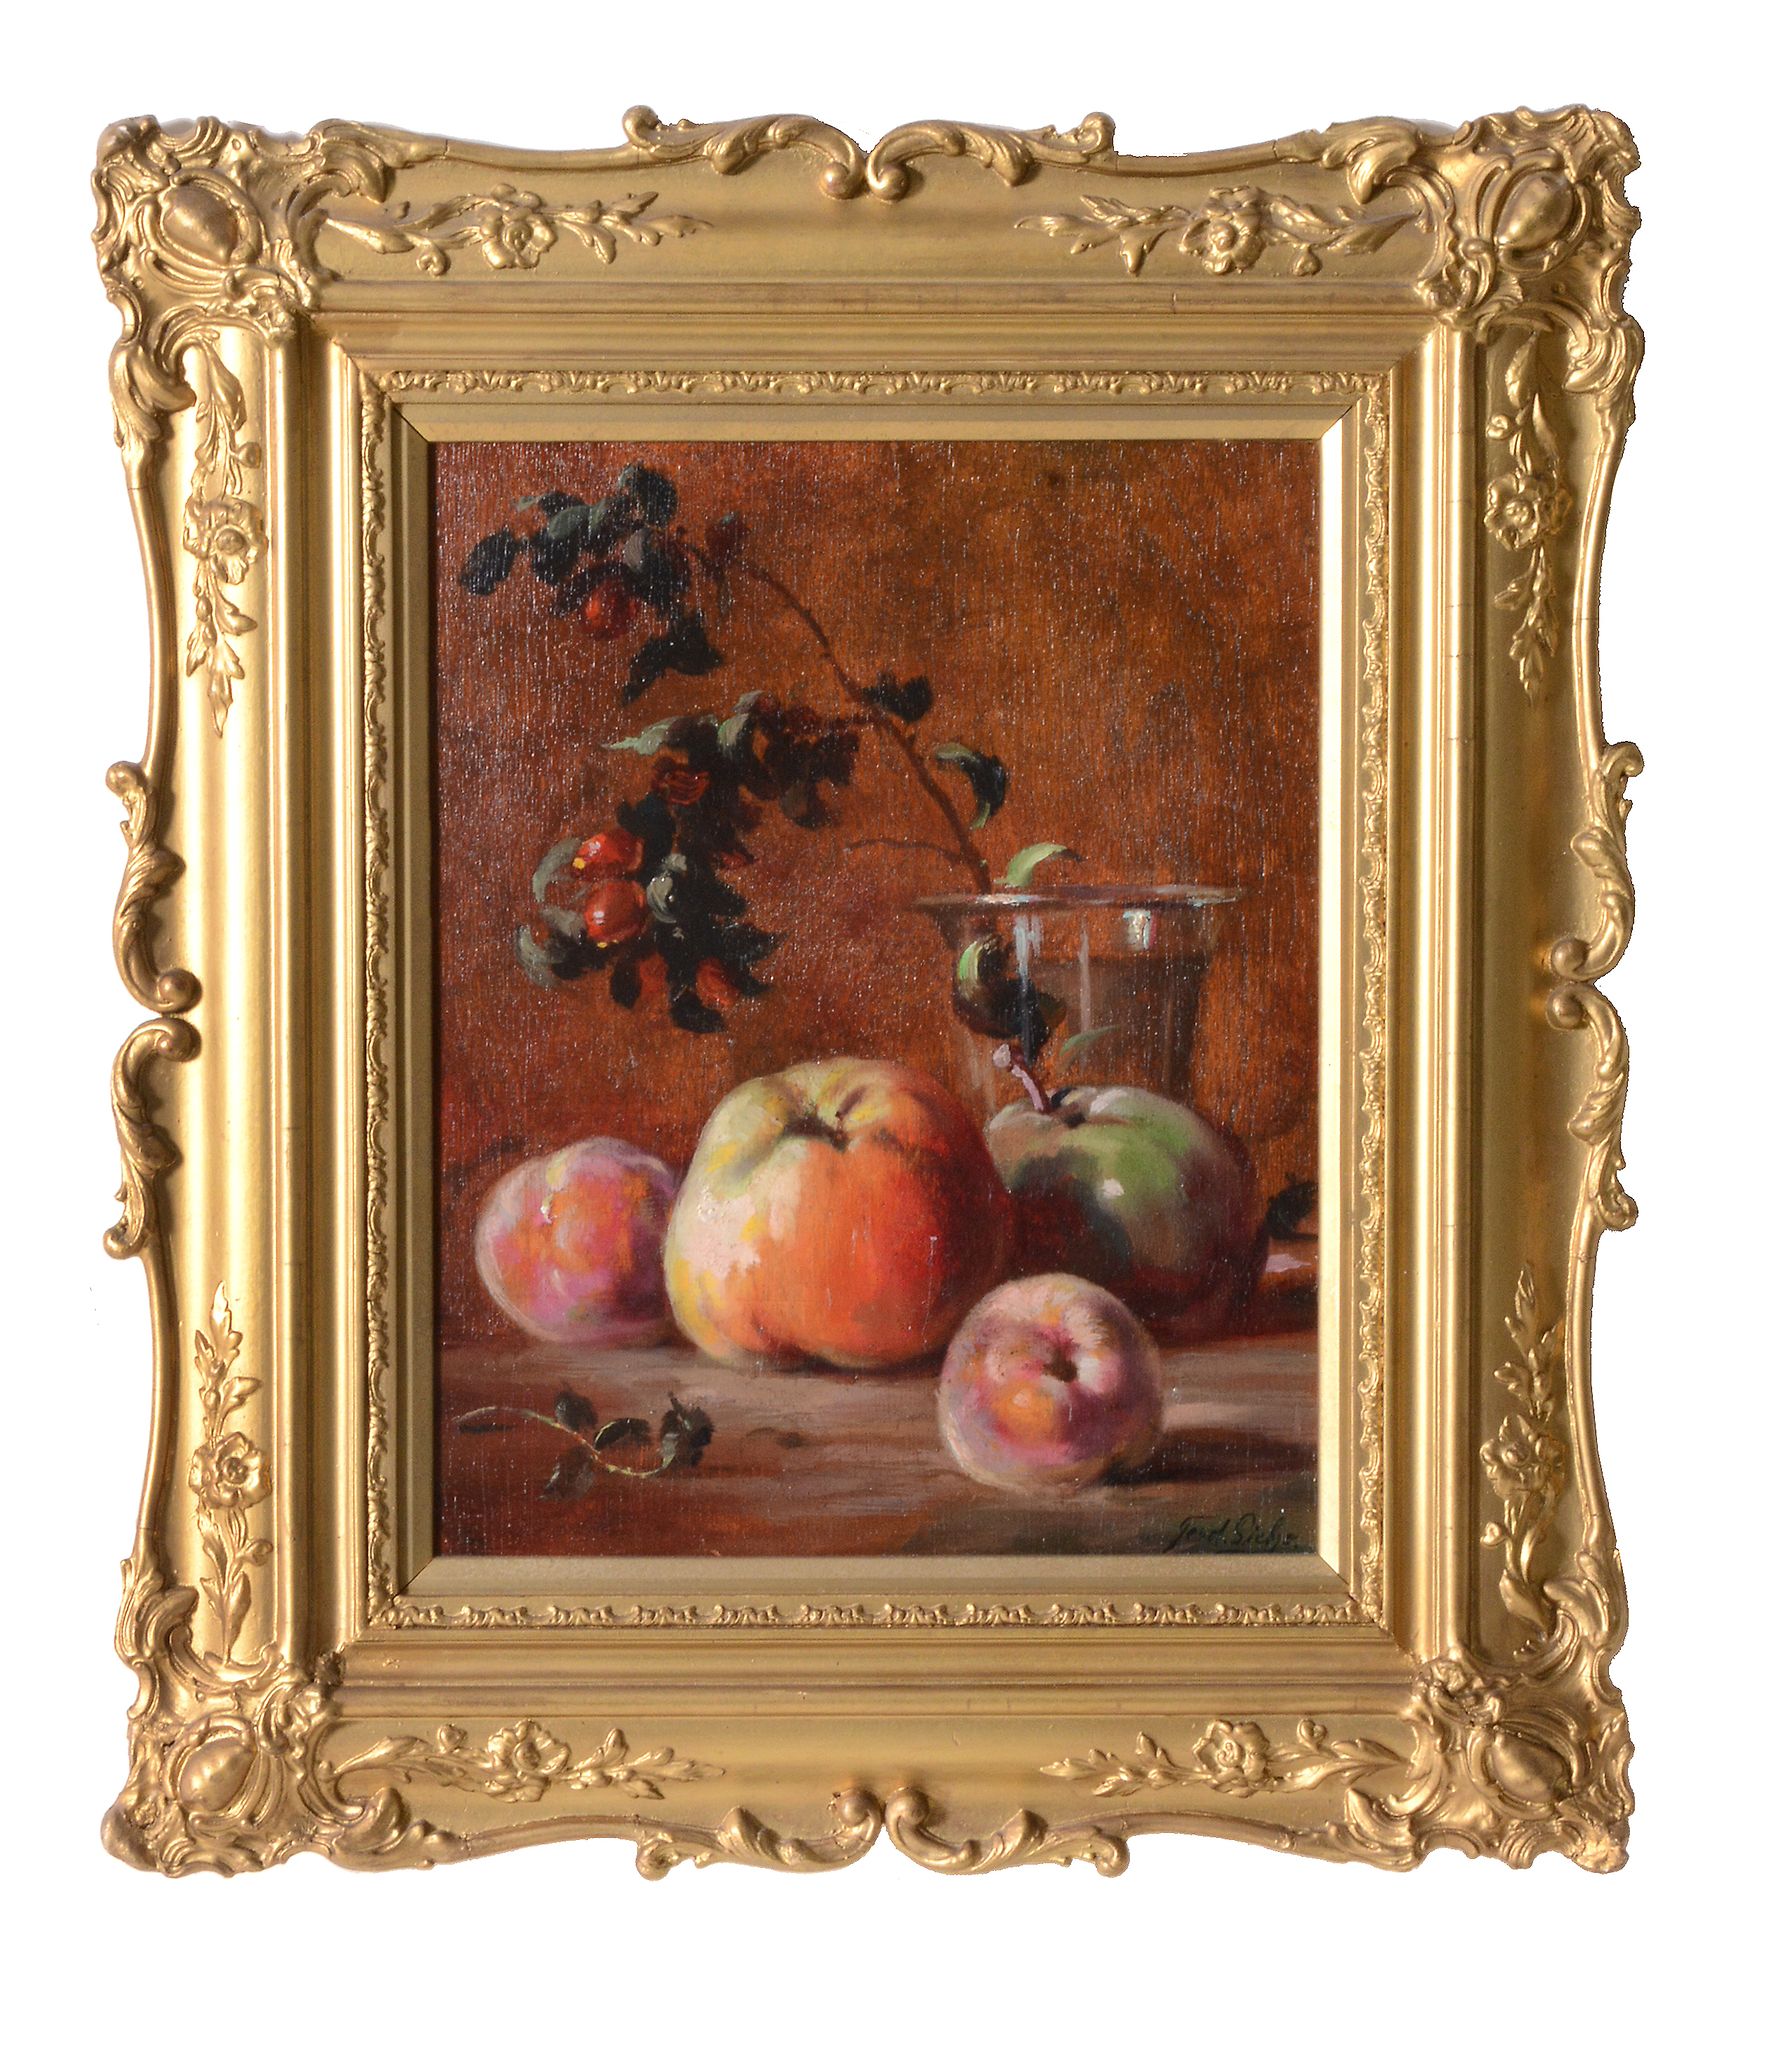 Continental School (circa 1920) - Still life with apples and pears  Oil on canvas board - Image 2 of 3